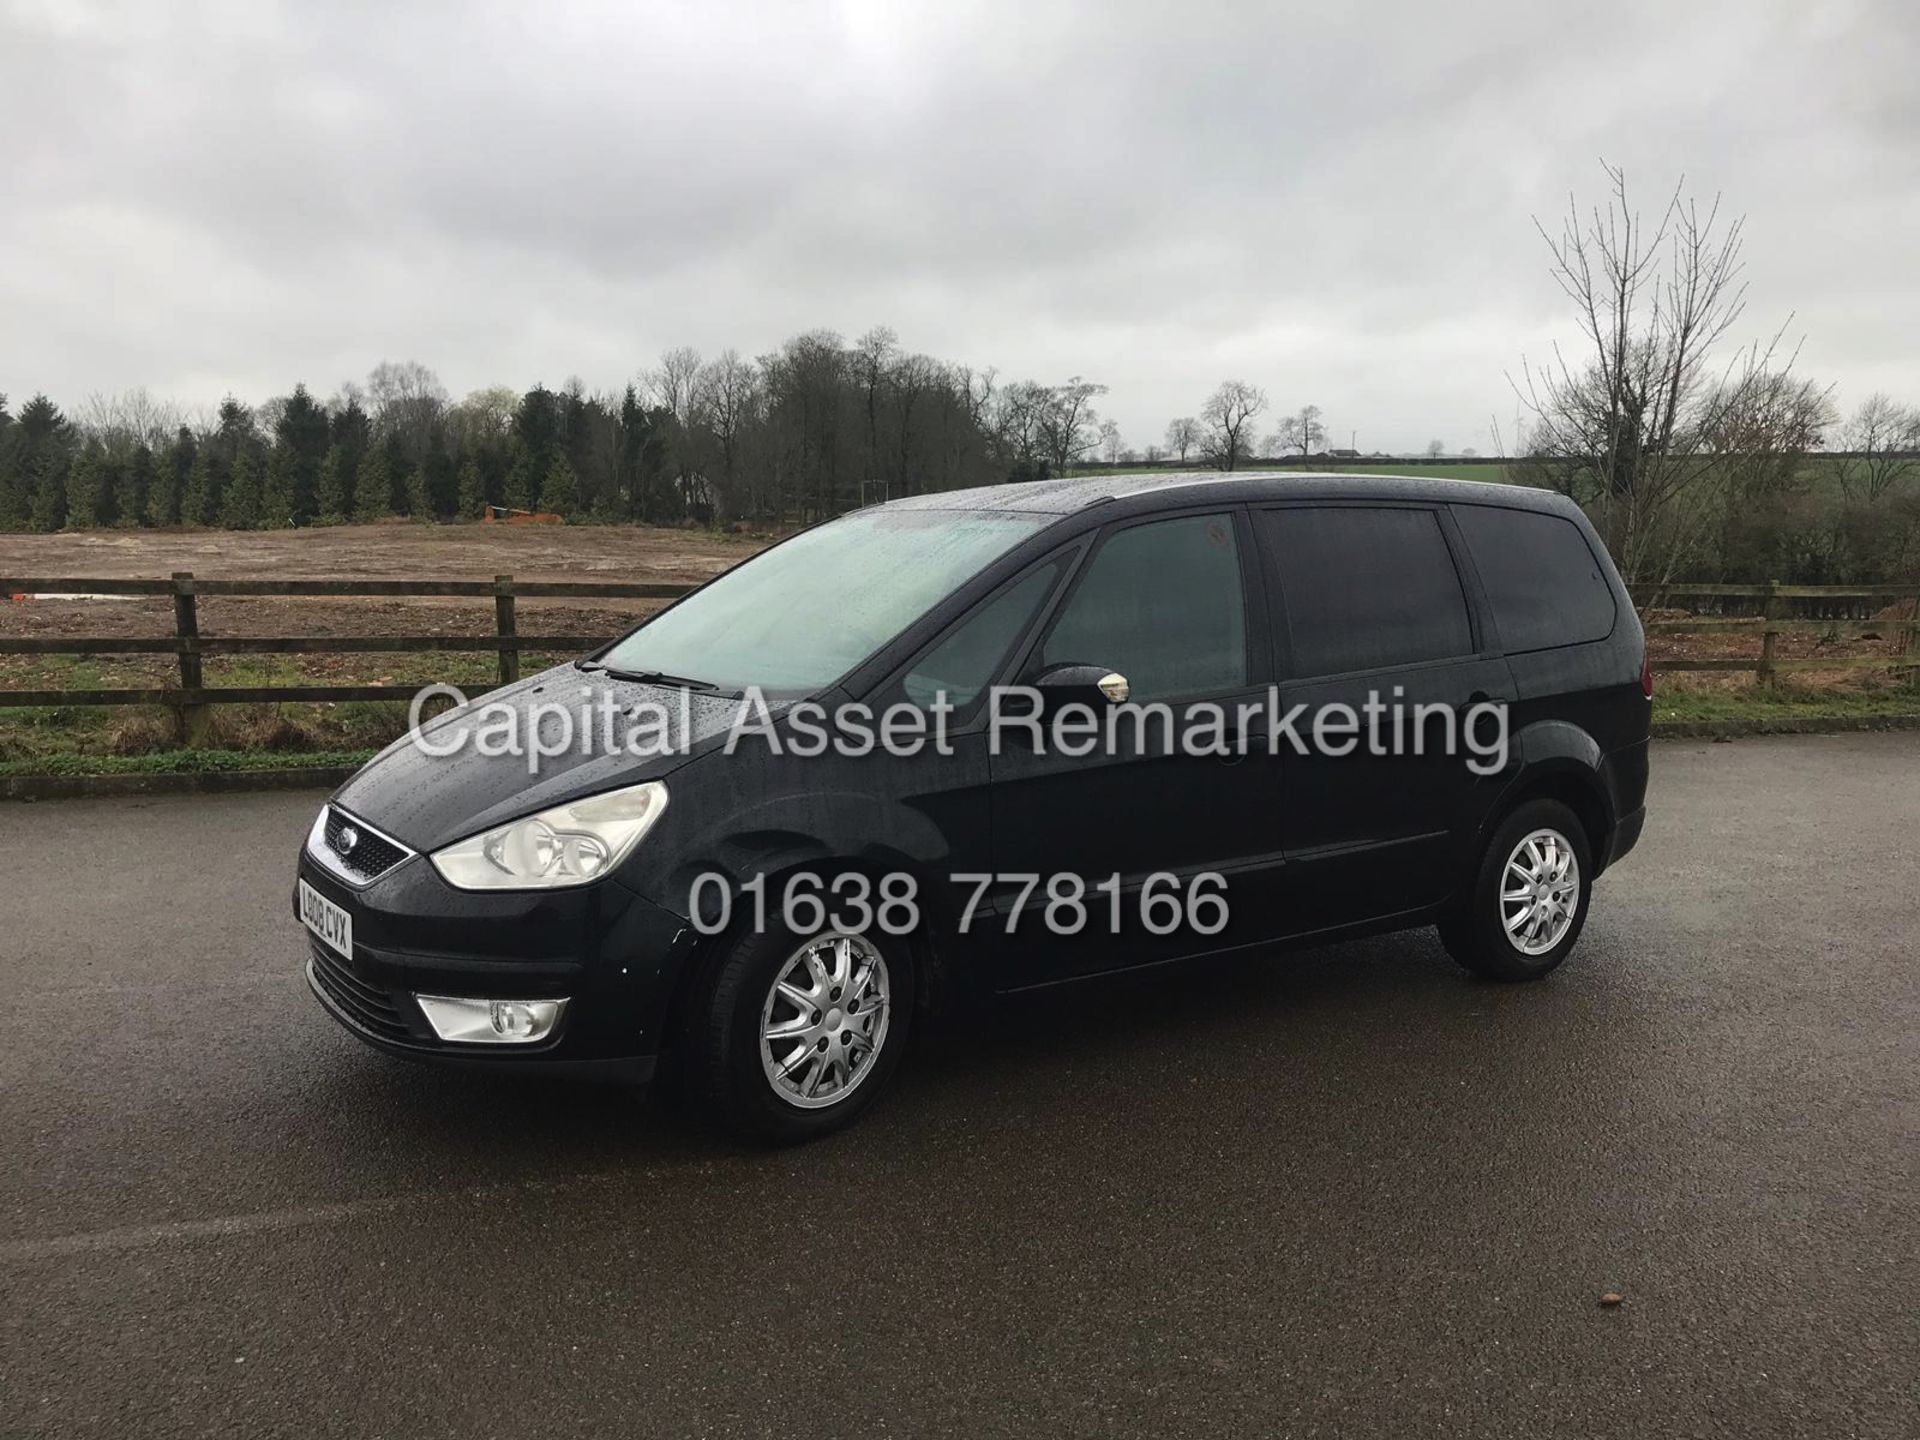 (ON SALE) FORD GALAXY 2.0TDCI "EDGE" 7 SEATER - 08 REG - AIR CON - 1 PREVIOUS OWNER - BLACK